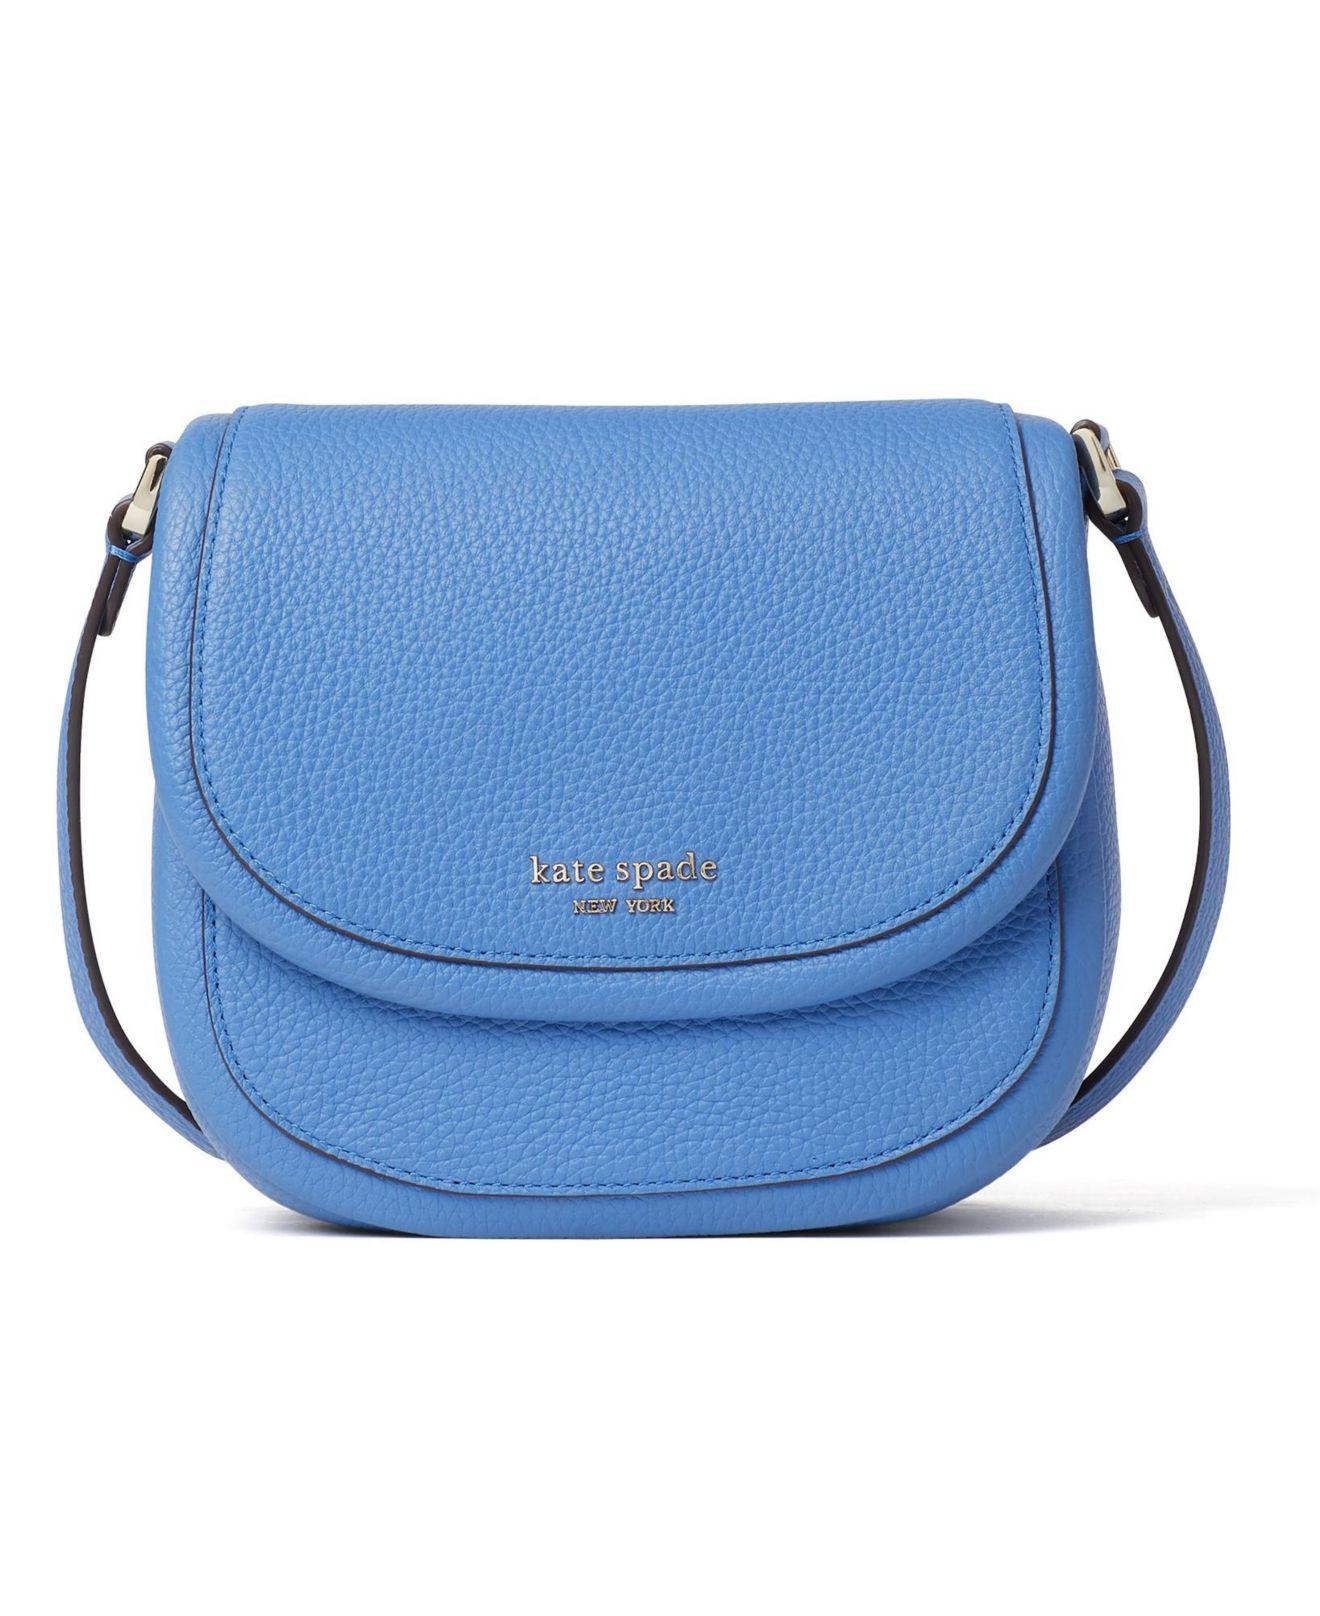 Kate Spade Roulette Small Saddle Bag in Blue | Lyst